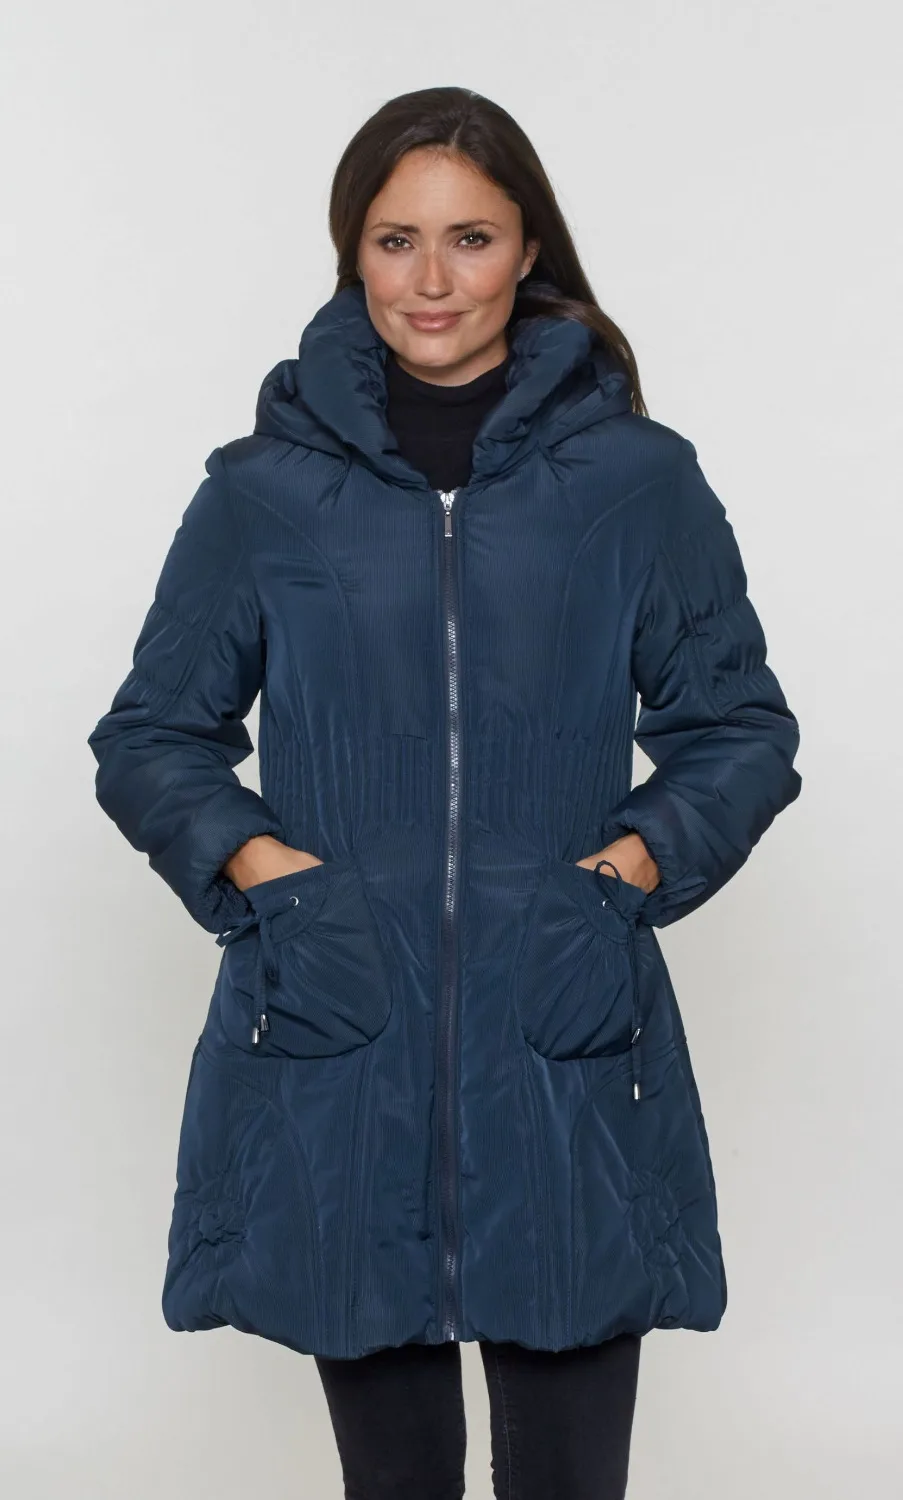 Ladies' casual long padding jacket,with detachable hood,ruched collar